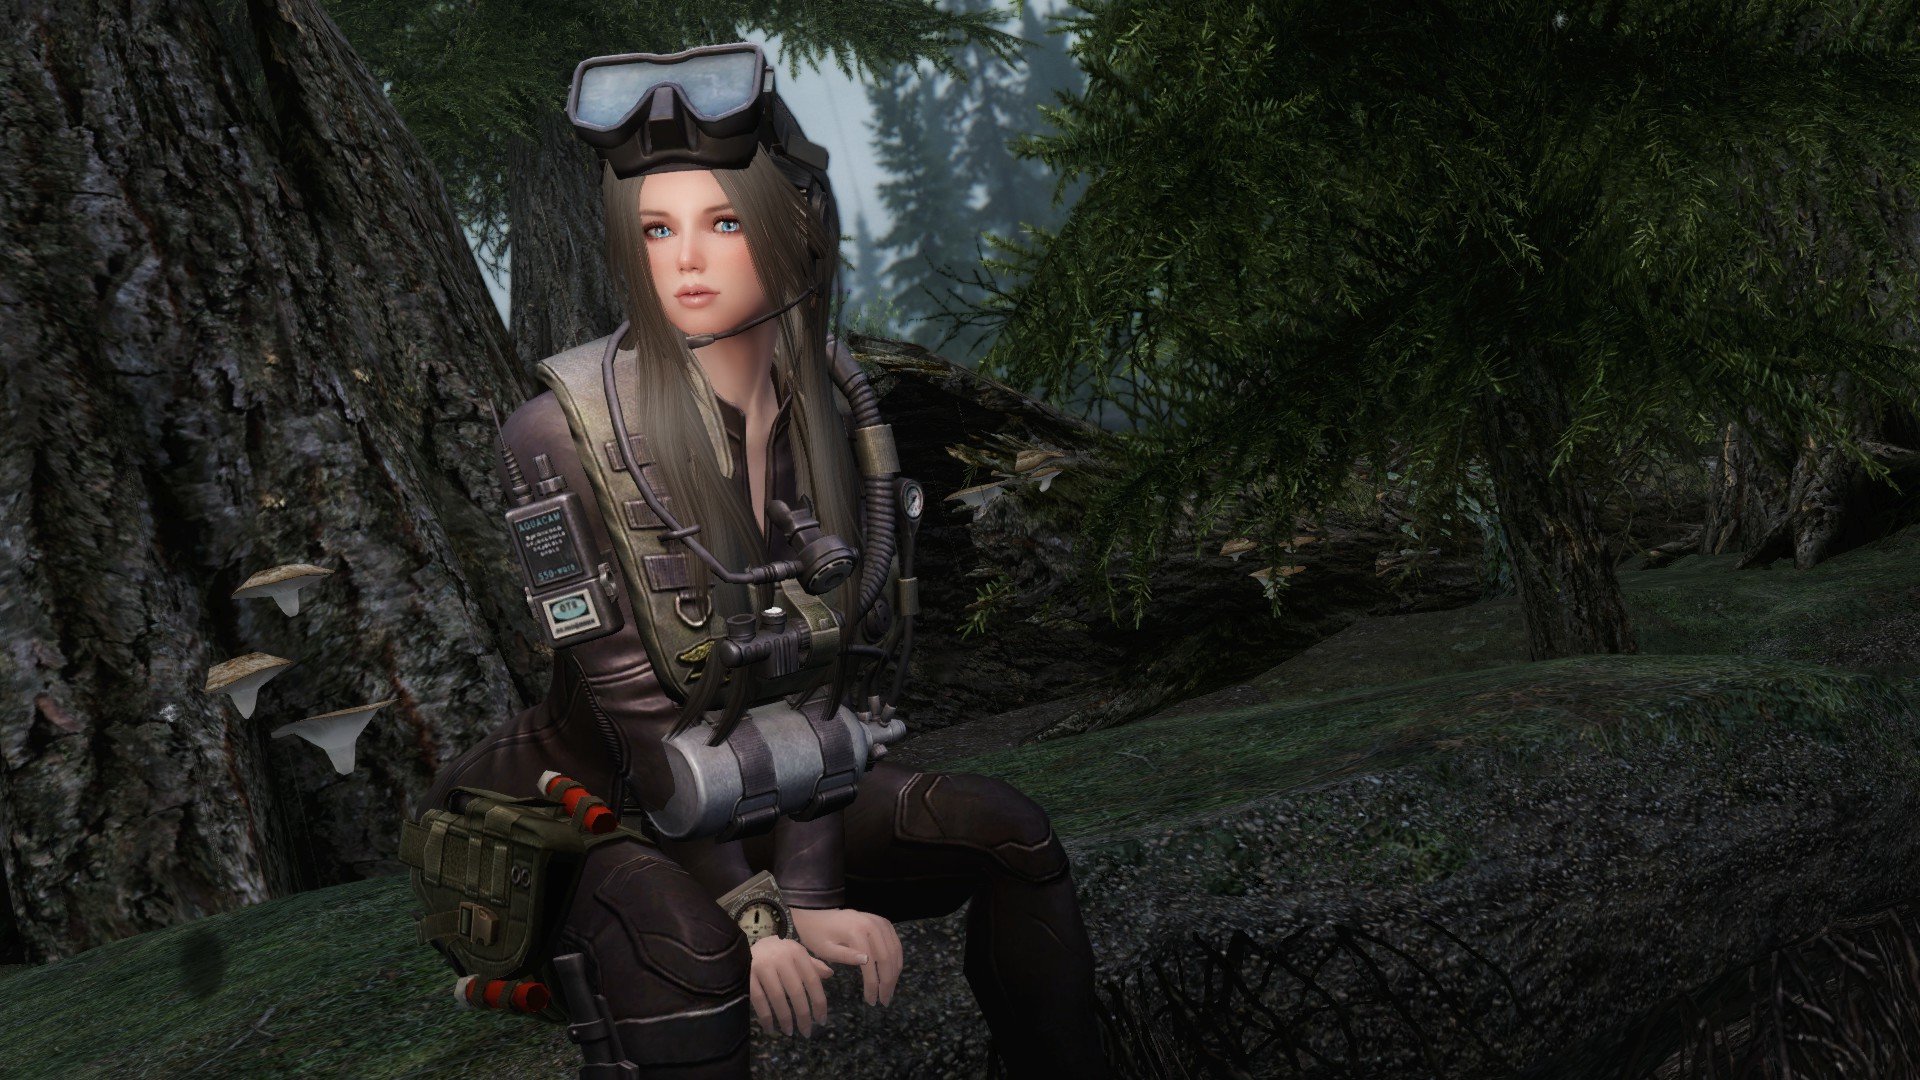 Counter-Strike Online 2 Outfit Pack - Armor & Clothing - LoversLab